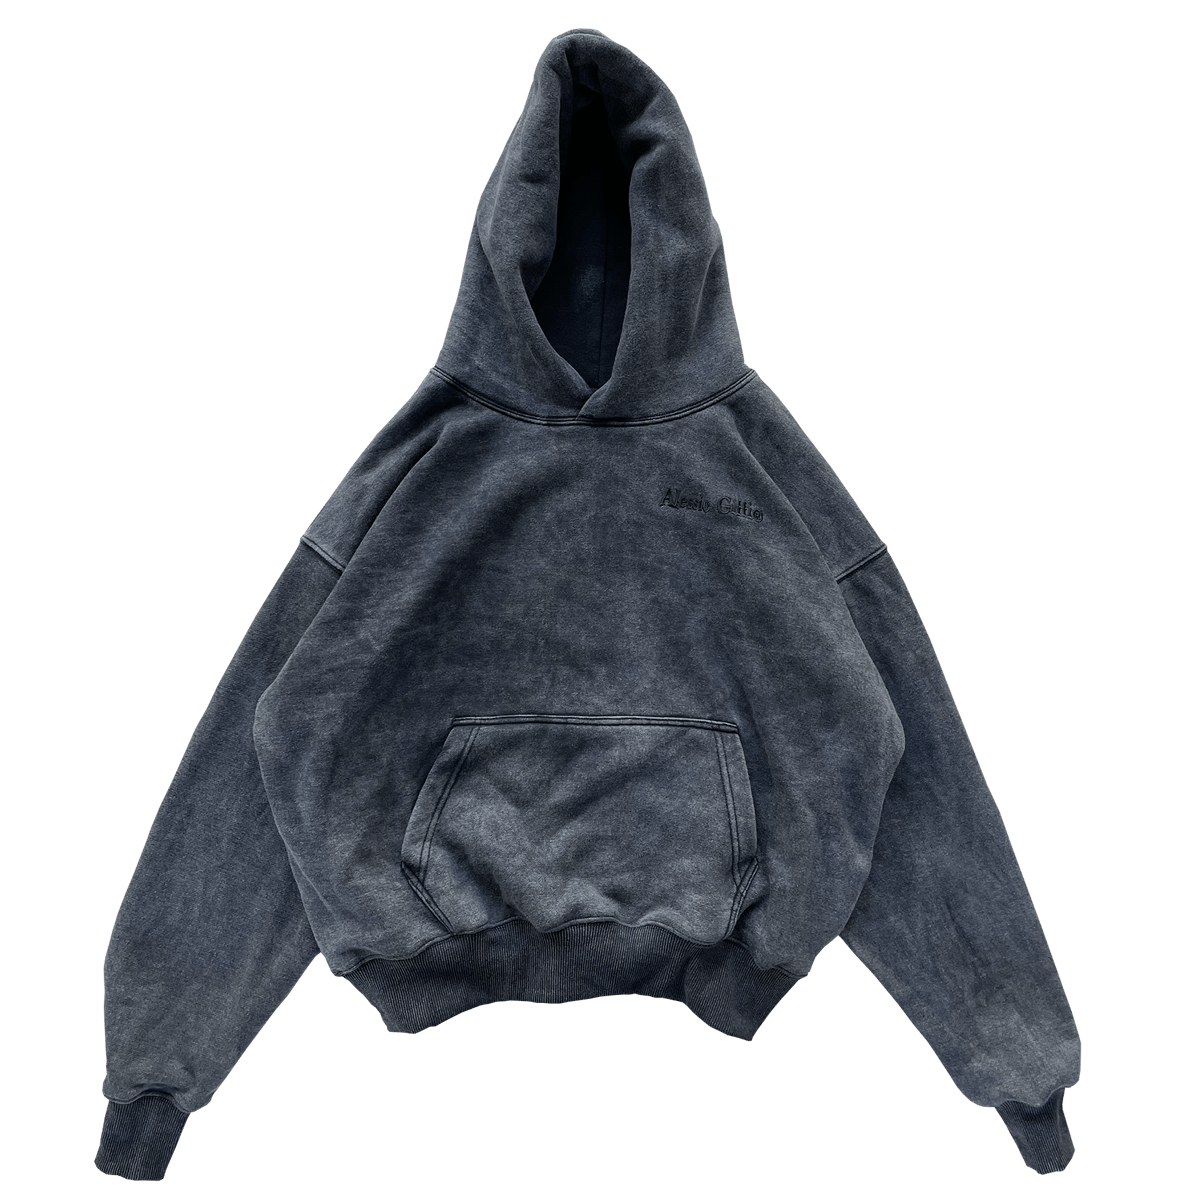 Image of lost in the game of life - perfect hoodie stone washed